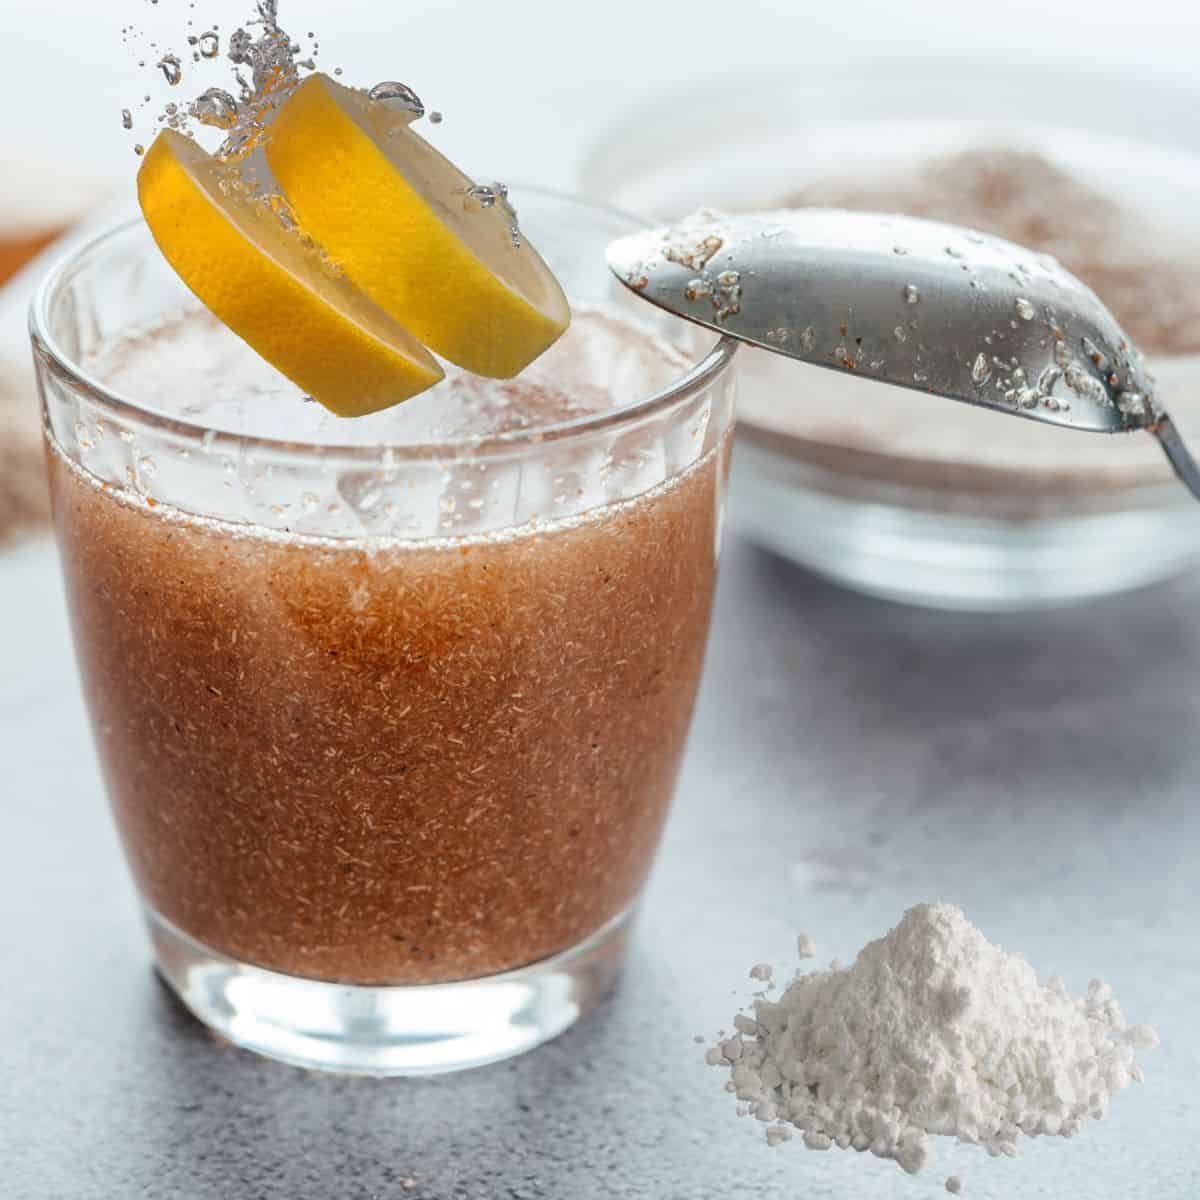 A cup of hydrated psyllium husk with a lemon slice splashing into it next to a pile of bentonite clay powder all in preparation for the mucoid plaque cleanse recipe